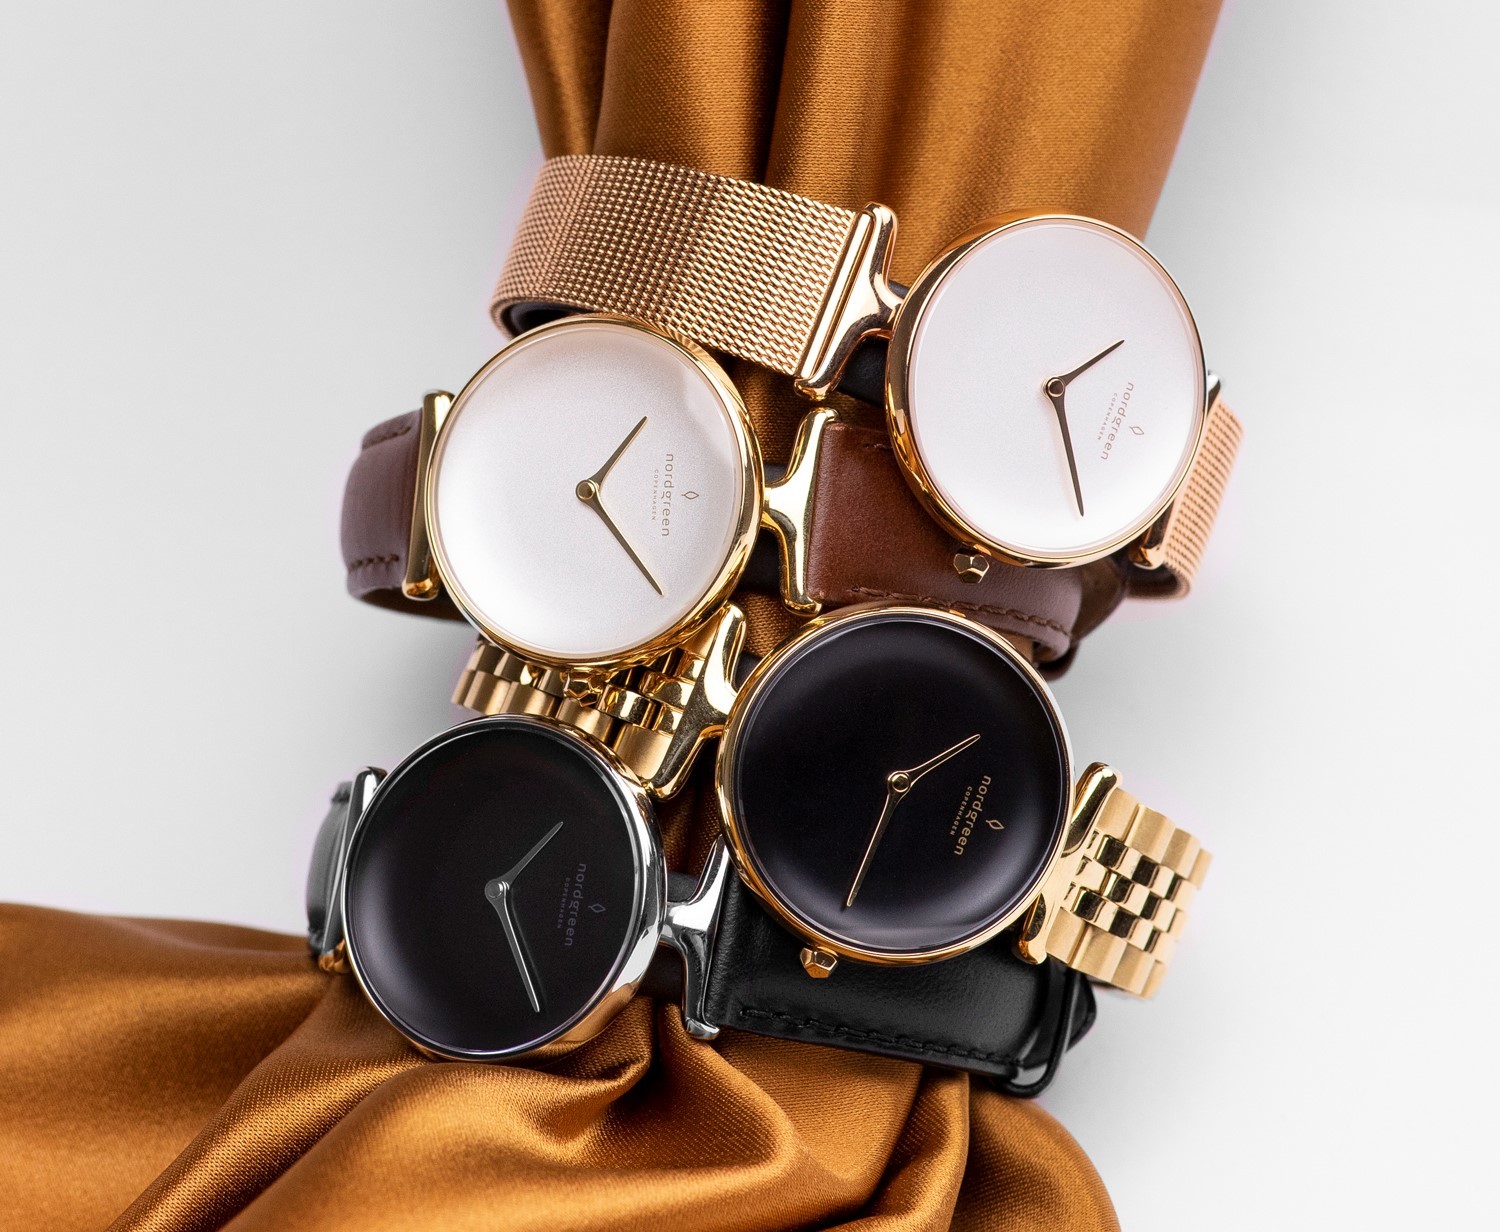 From Classic to Contemporary: Exploring Nordgreen's Unika Quartz Watch Collection